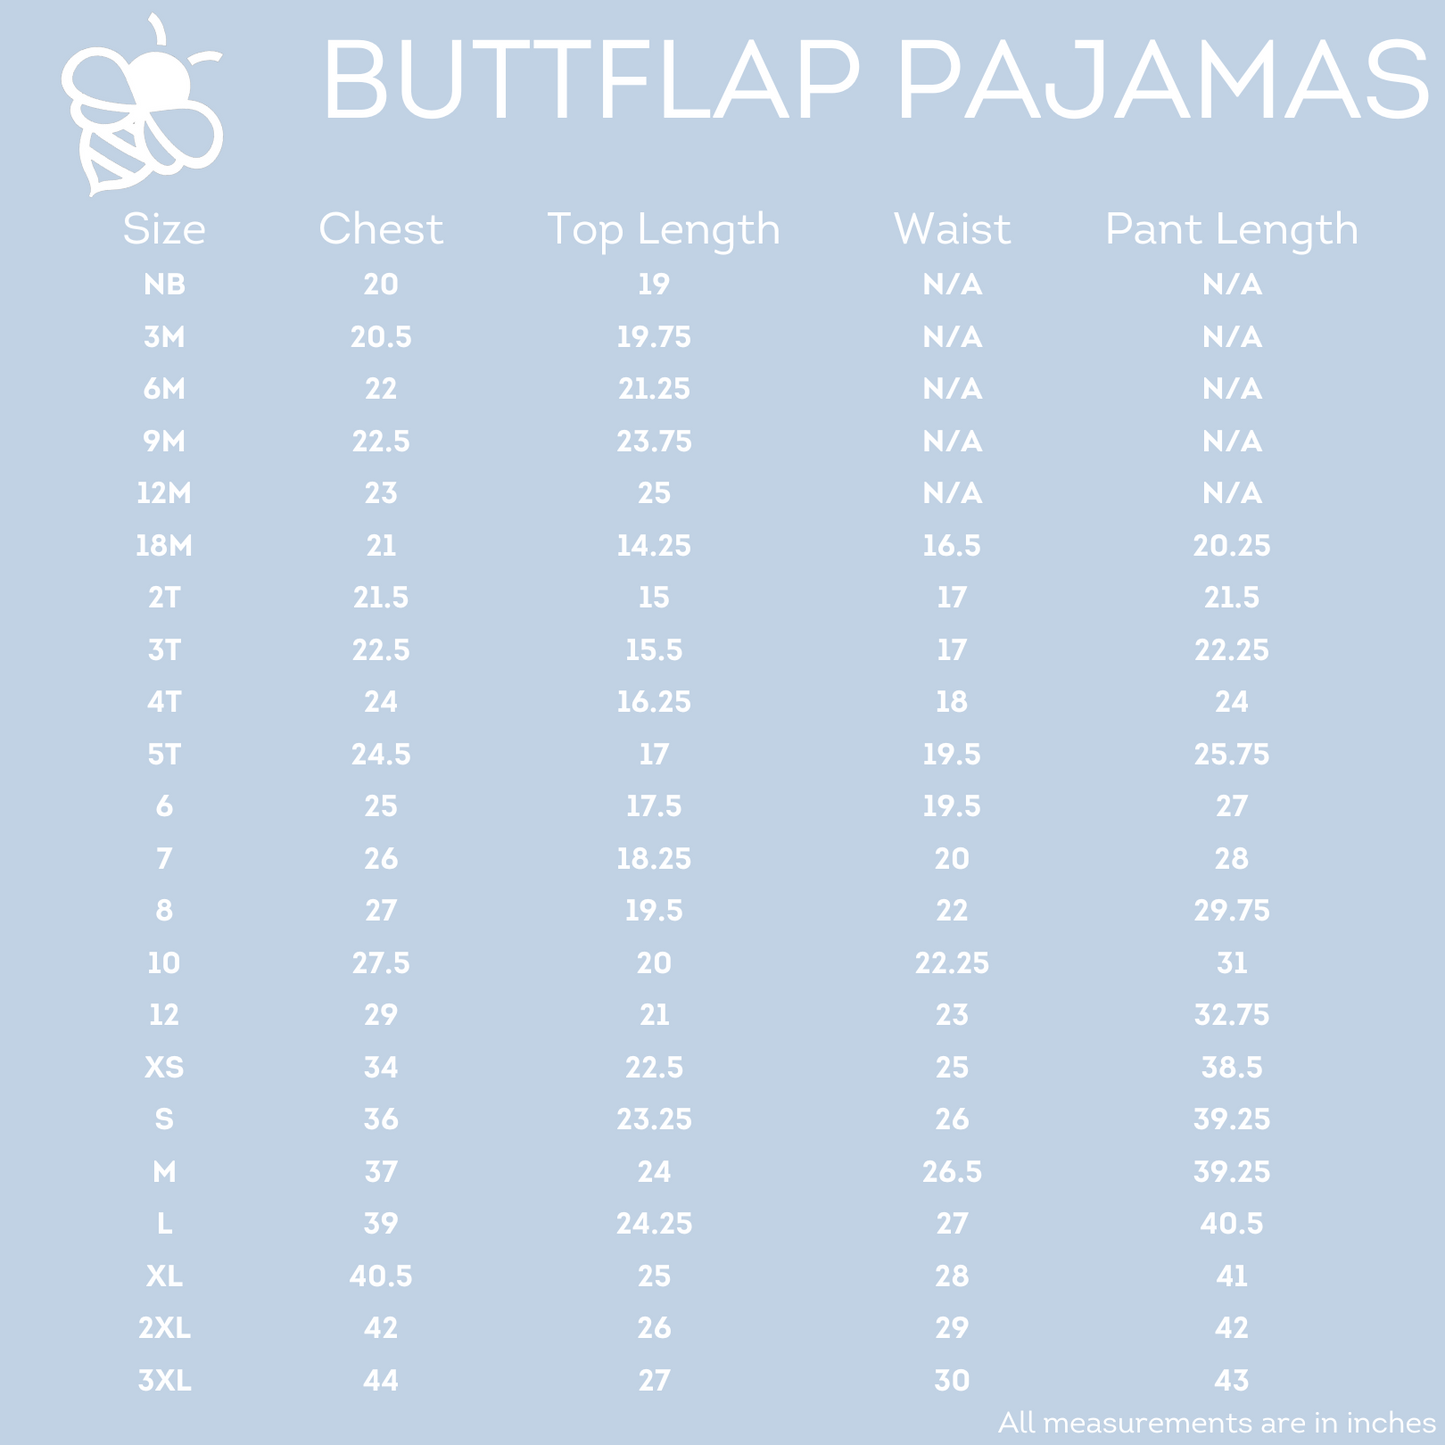 Trees And Candy Canes - Buttflap PJs